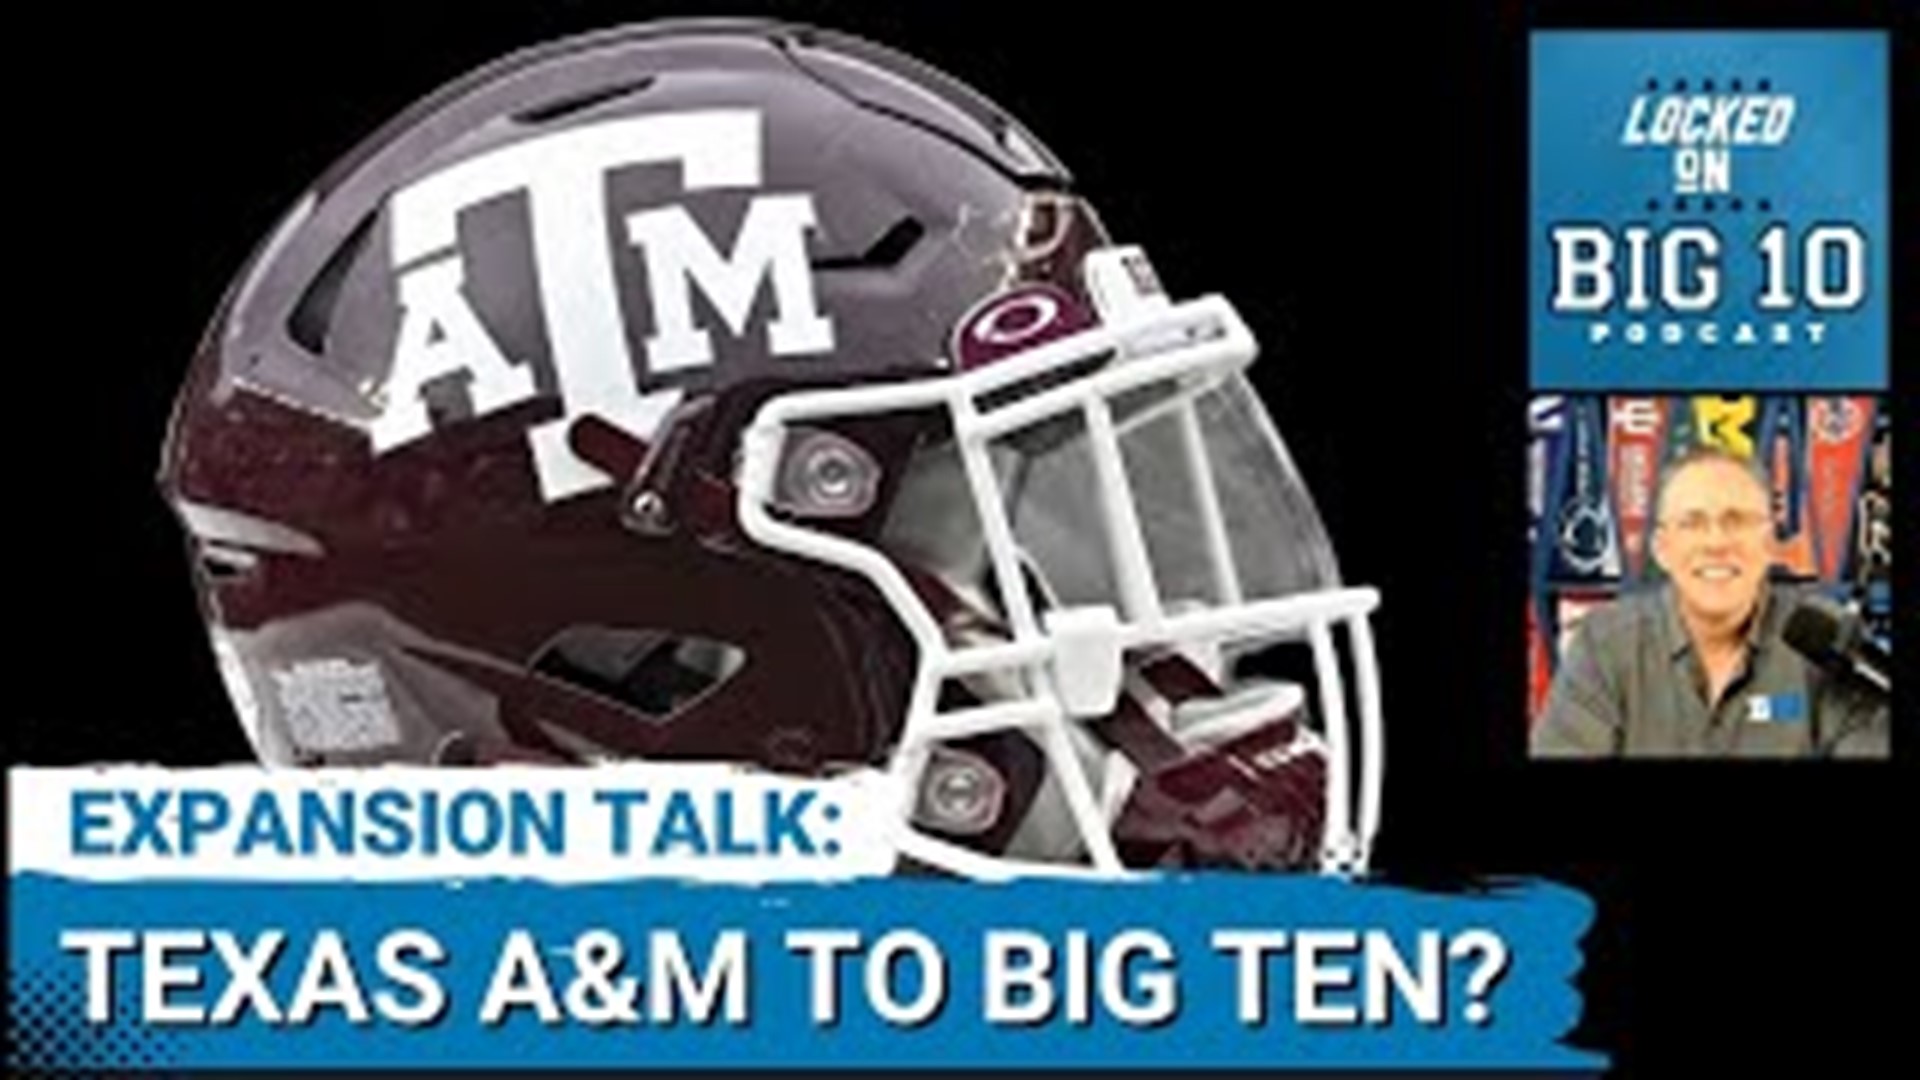 Keep an eye on Texas A&M.  Some think they may leave the SEC just as their old rival Texas Longhorns join.  Would the Aggies come to the Big 10?